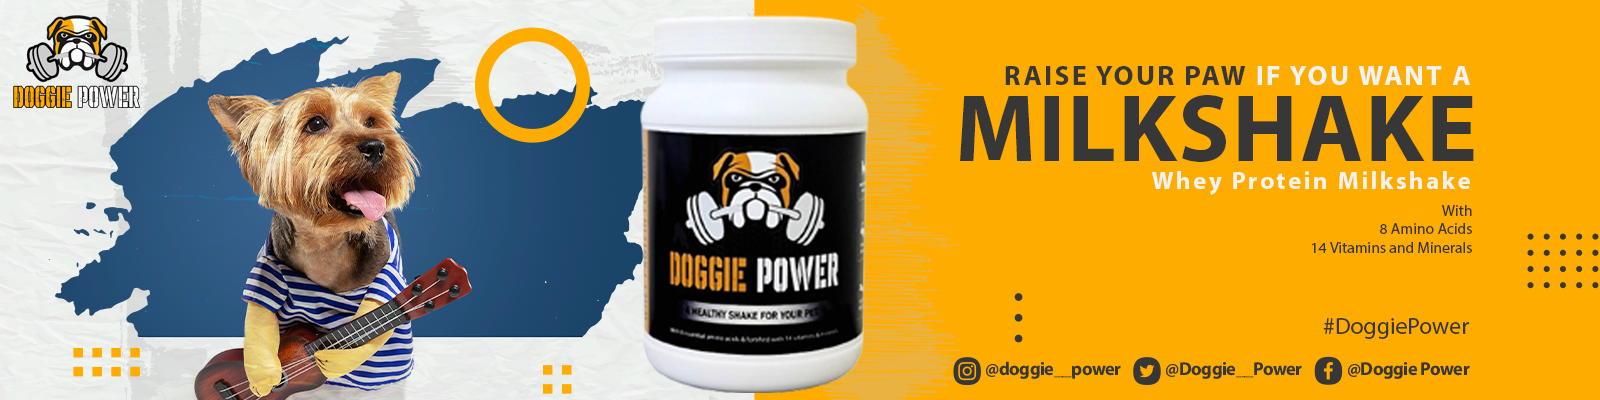 Raise your paw if you want a Milkshake Doggie Power Dog Supplement